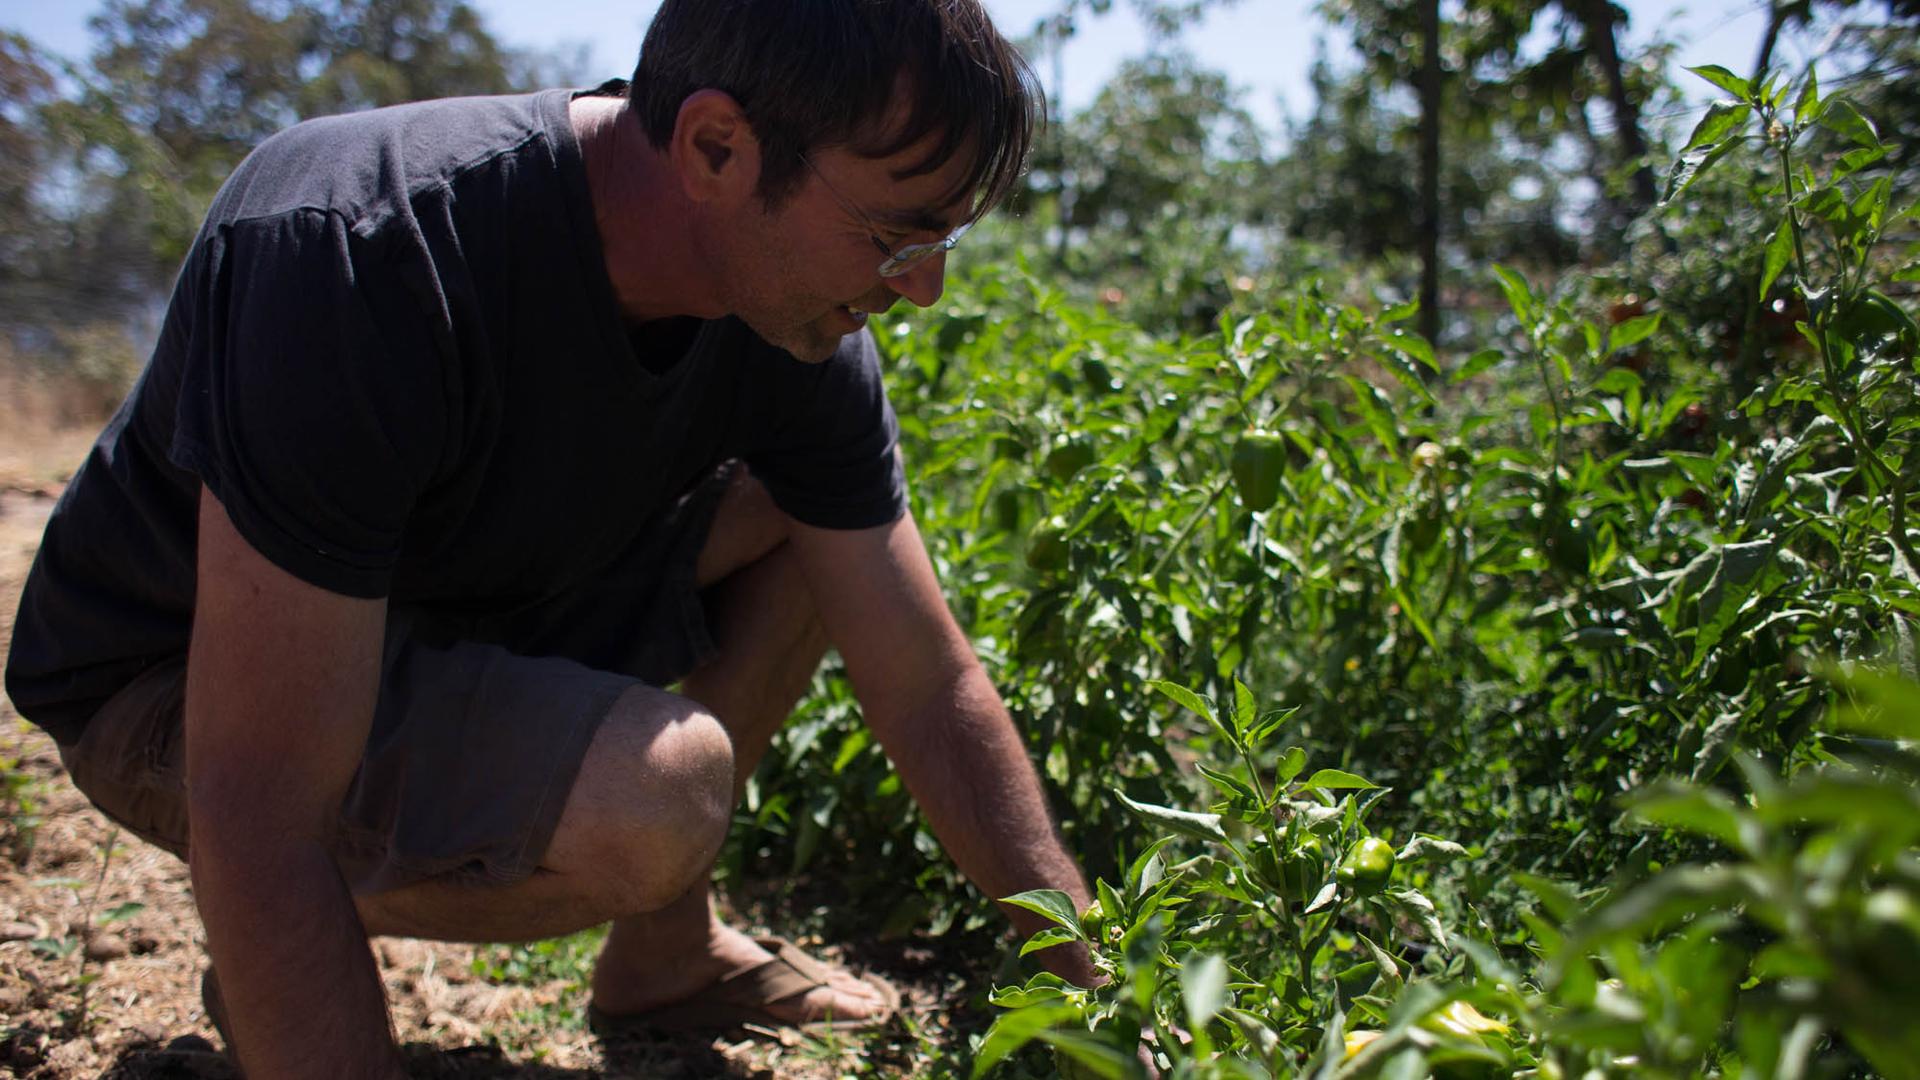 Shahar Caspi tends to peppers and other vegetables at his small community-supported farm in California's Sierra Nevada foothills. The Israeli transplant uses water-efficient farming methods he learned working the arid land back home.